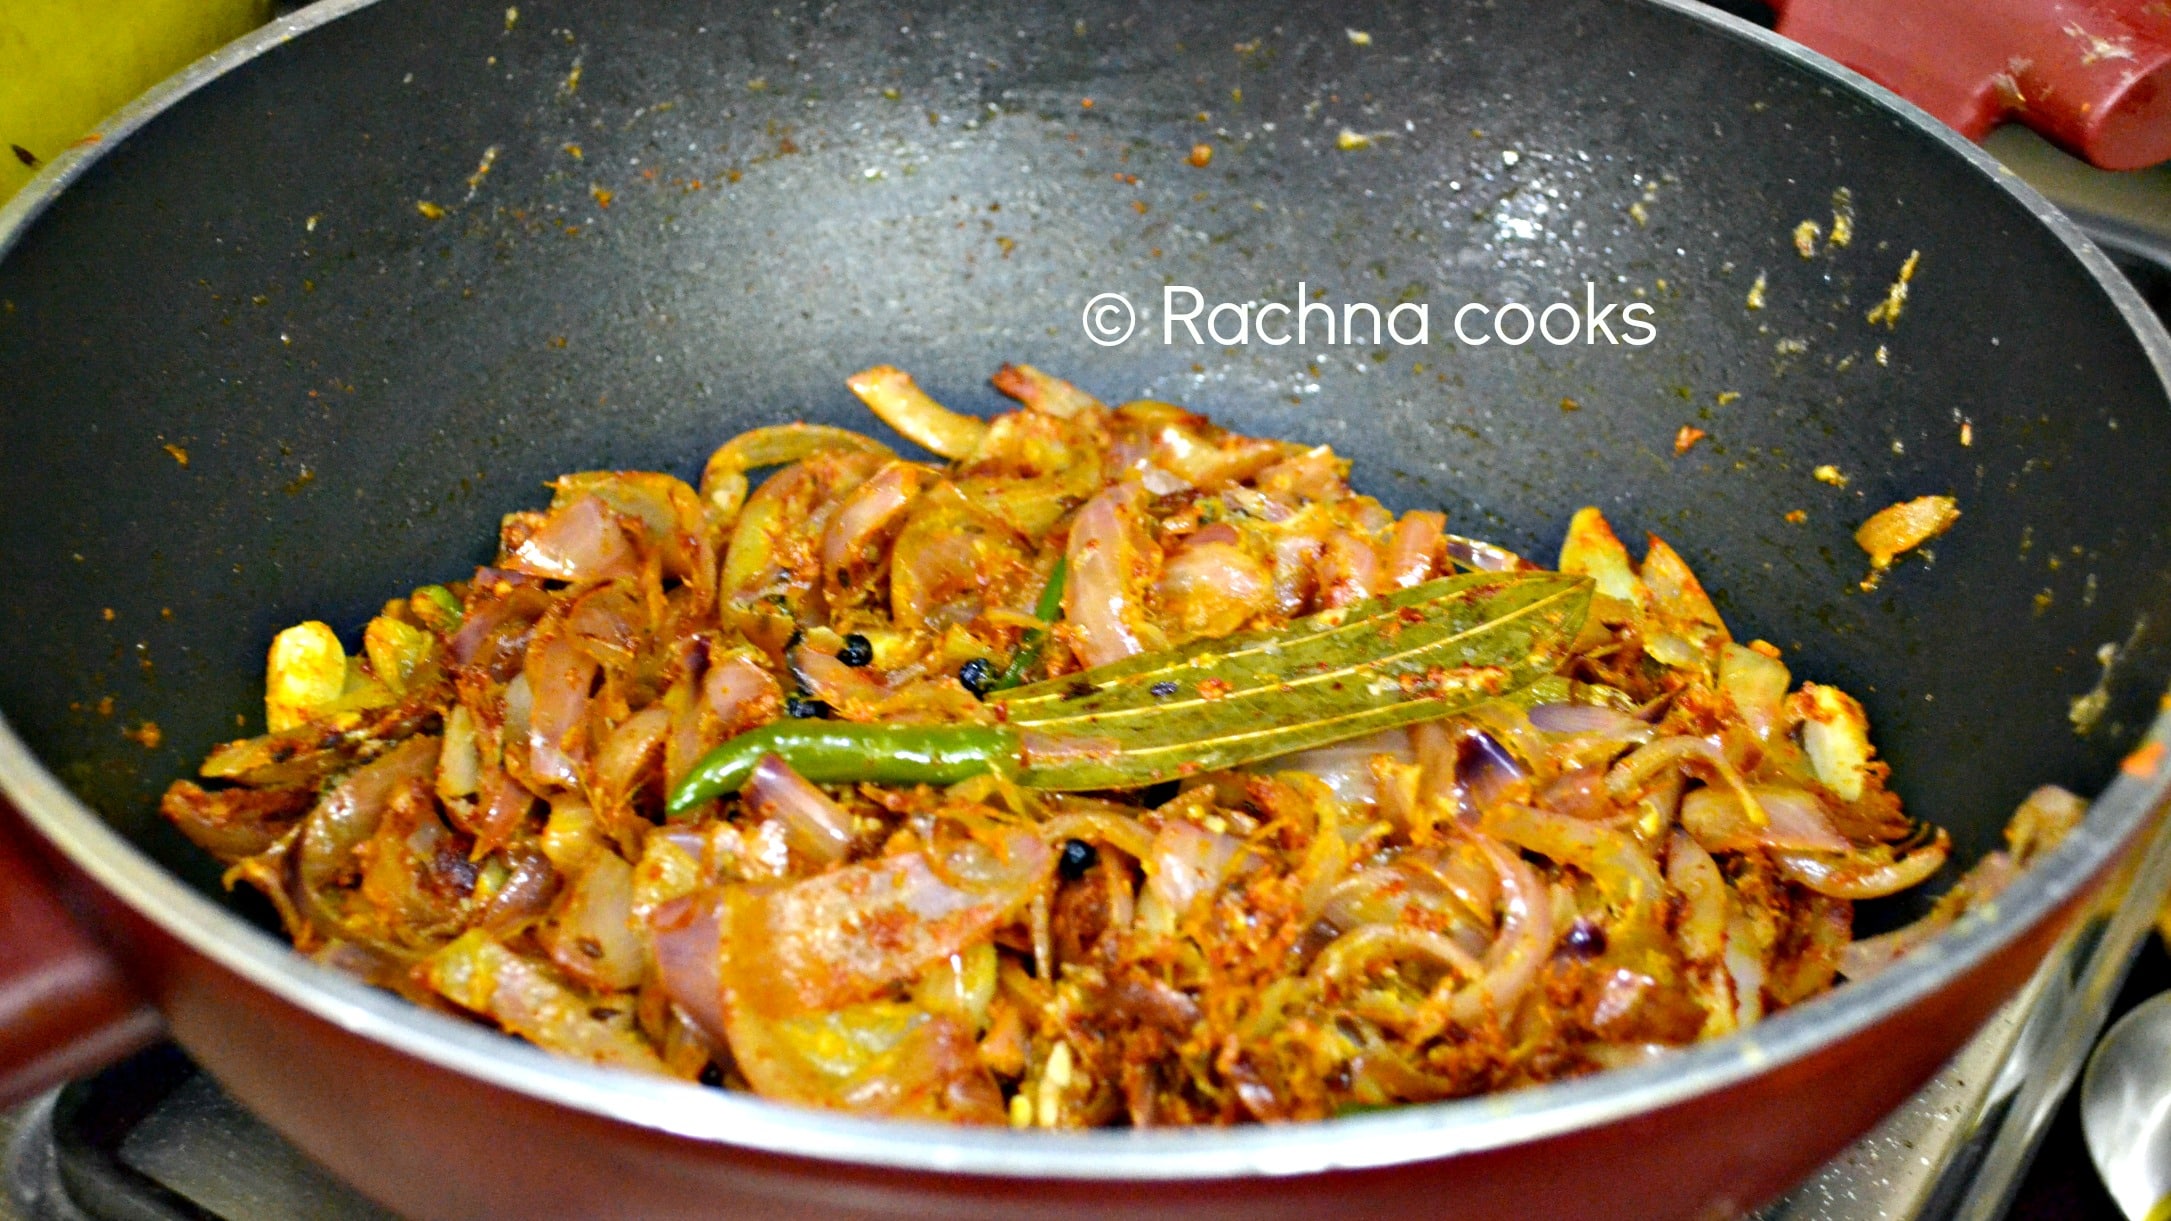 Sauteed curry masala with fried onions, whole spices, green chillies in a wok